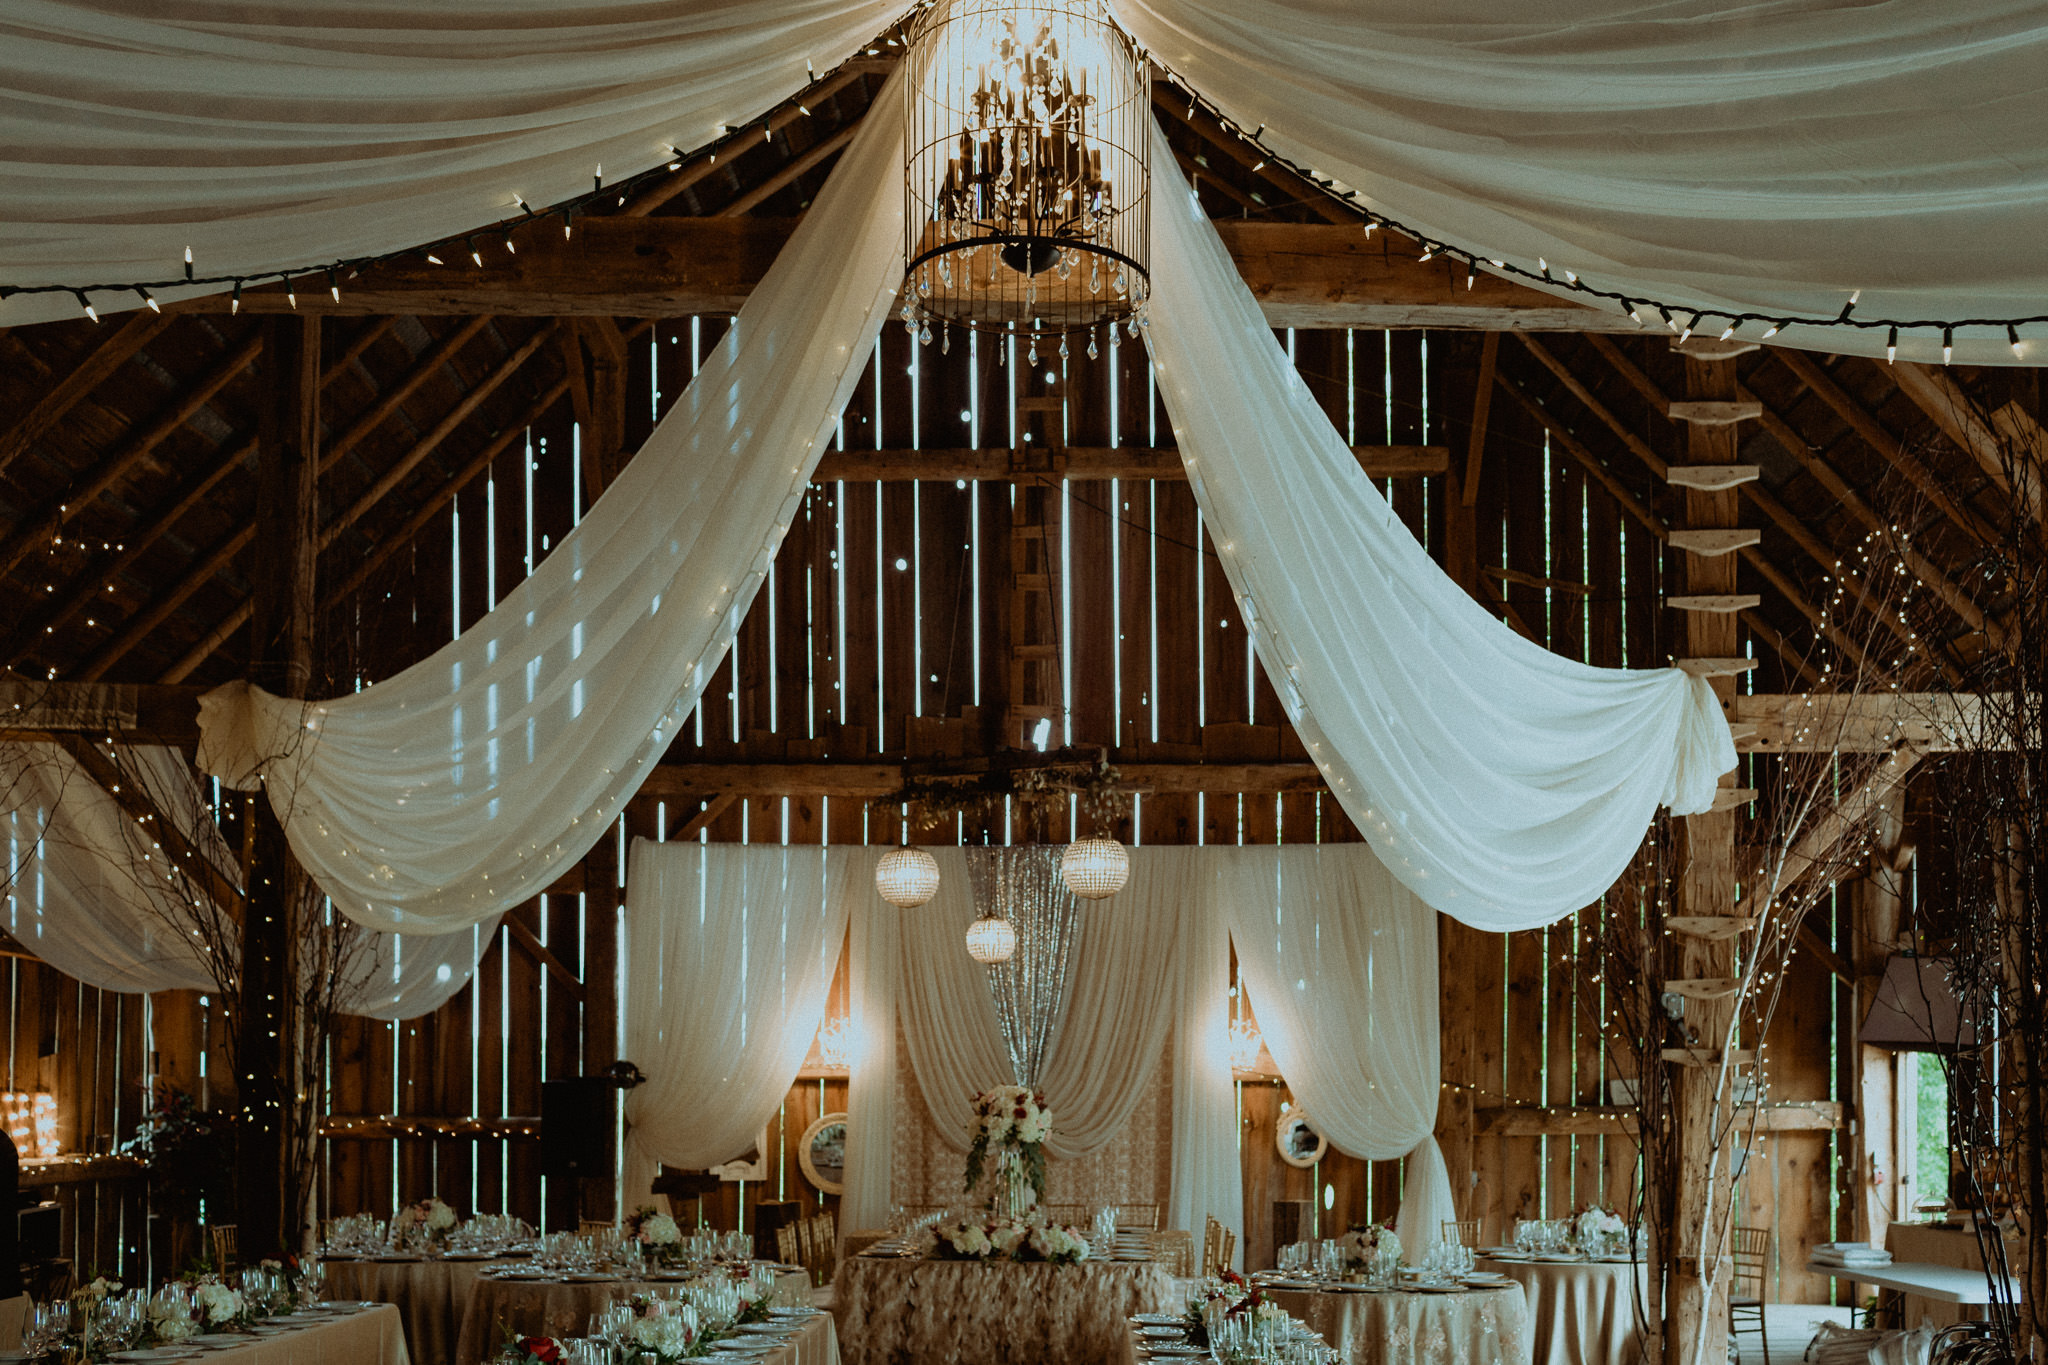 Century Barn indoor reception space detail and decor photos